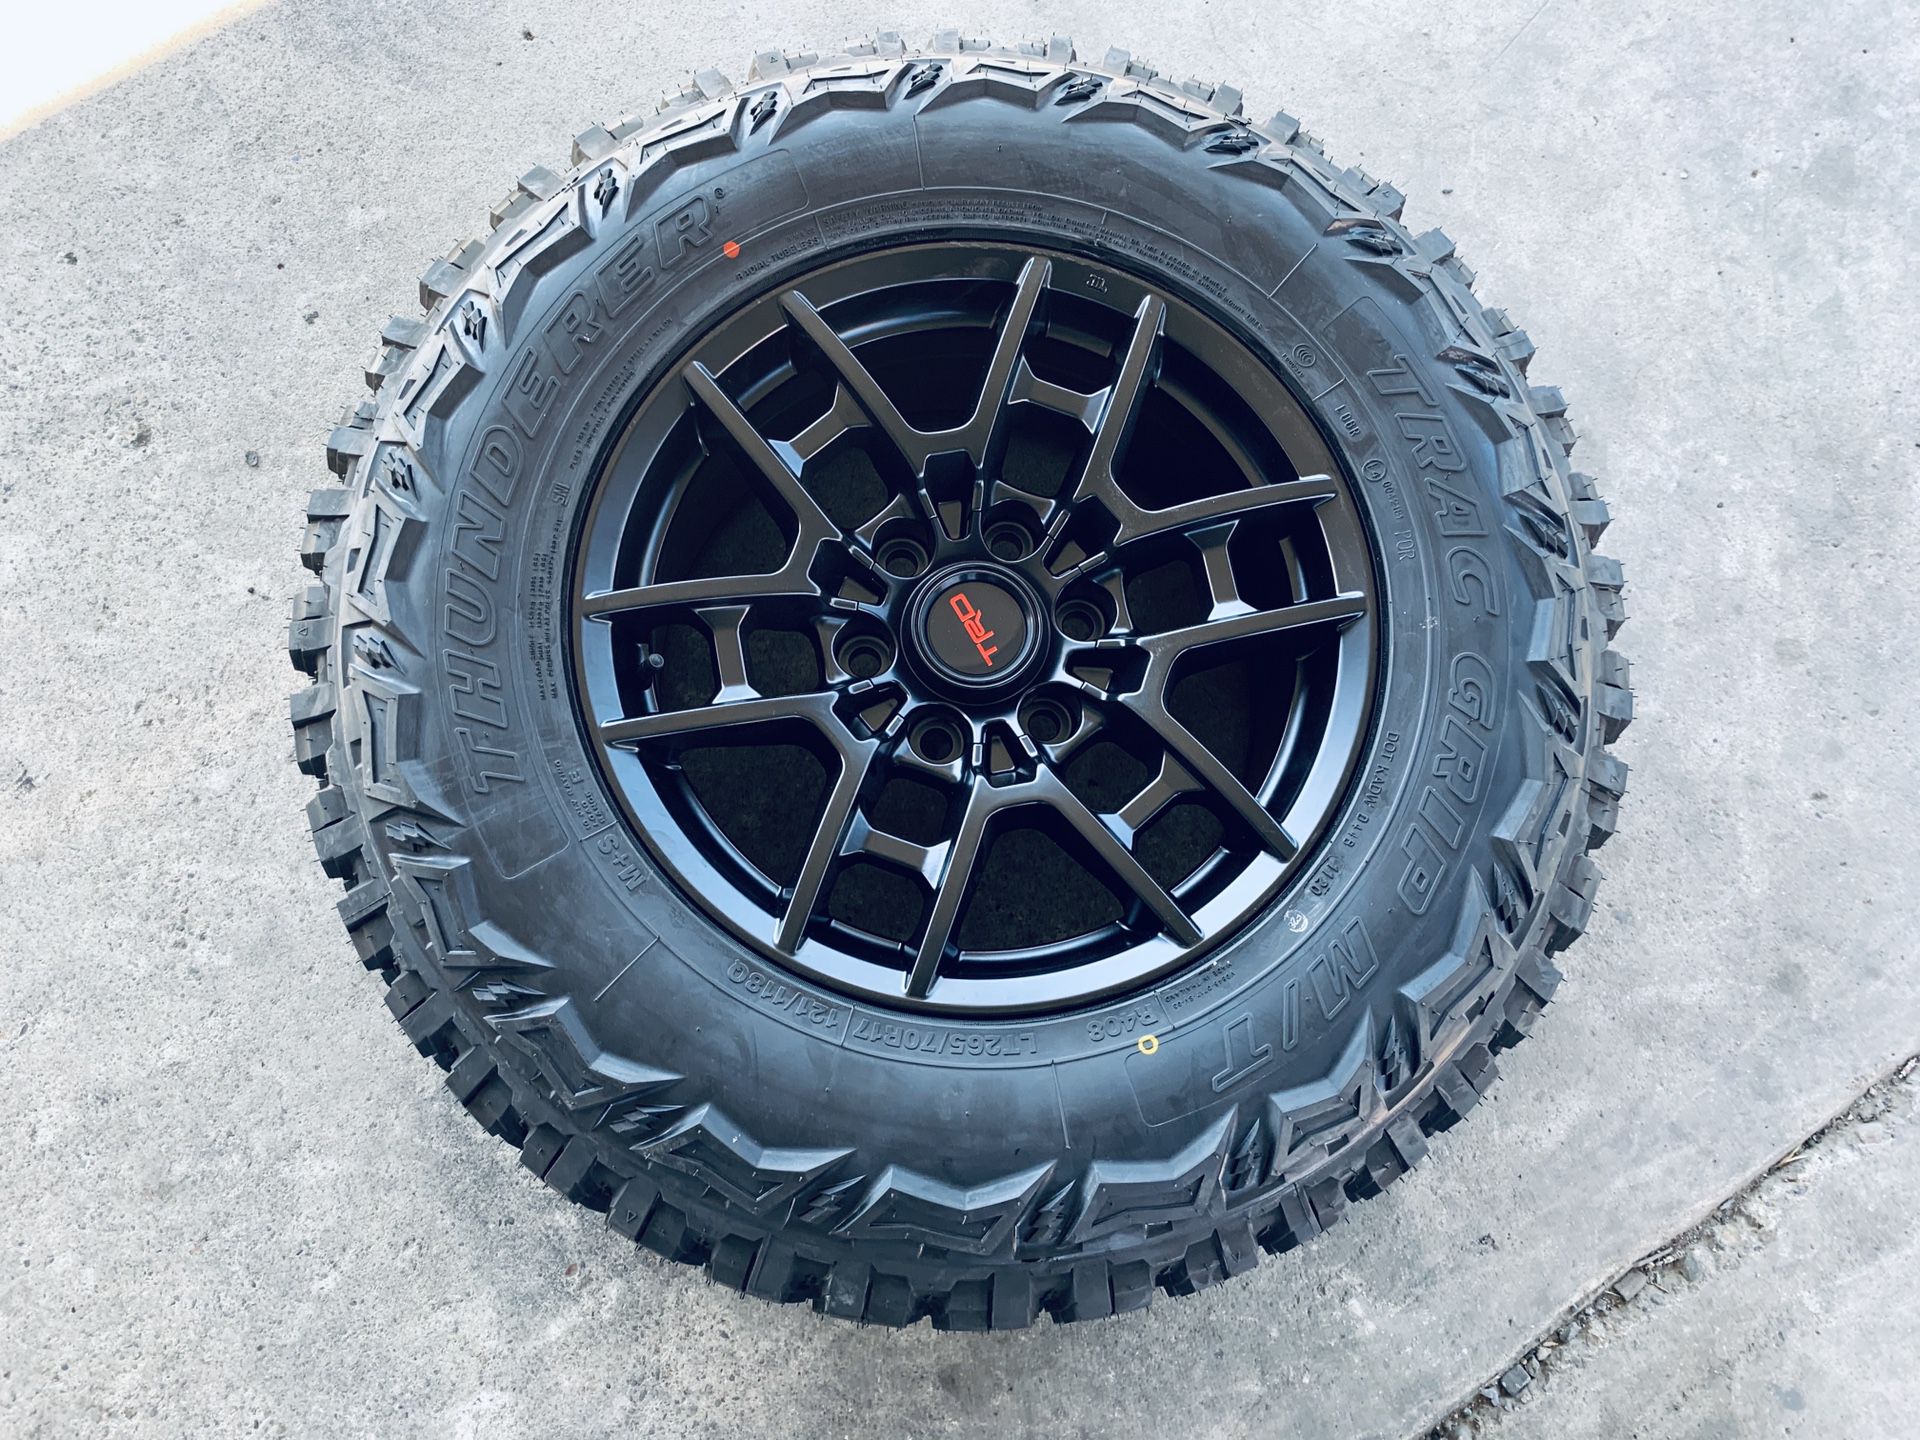 17” Trd style rims and mud tires 6 lug Toyota Chevy gmc